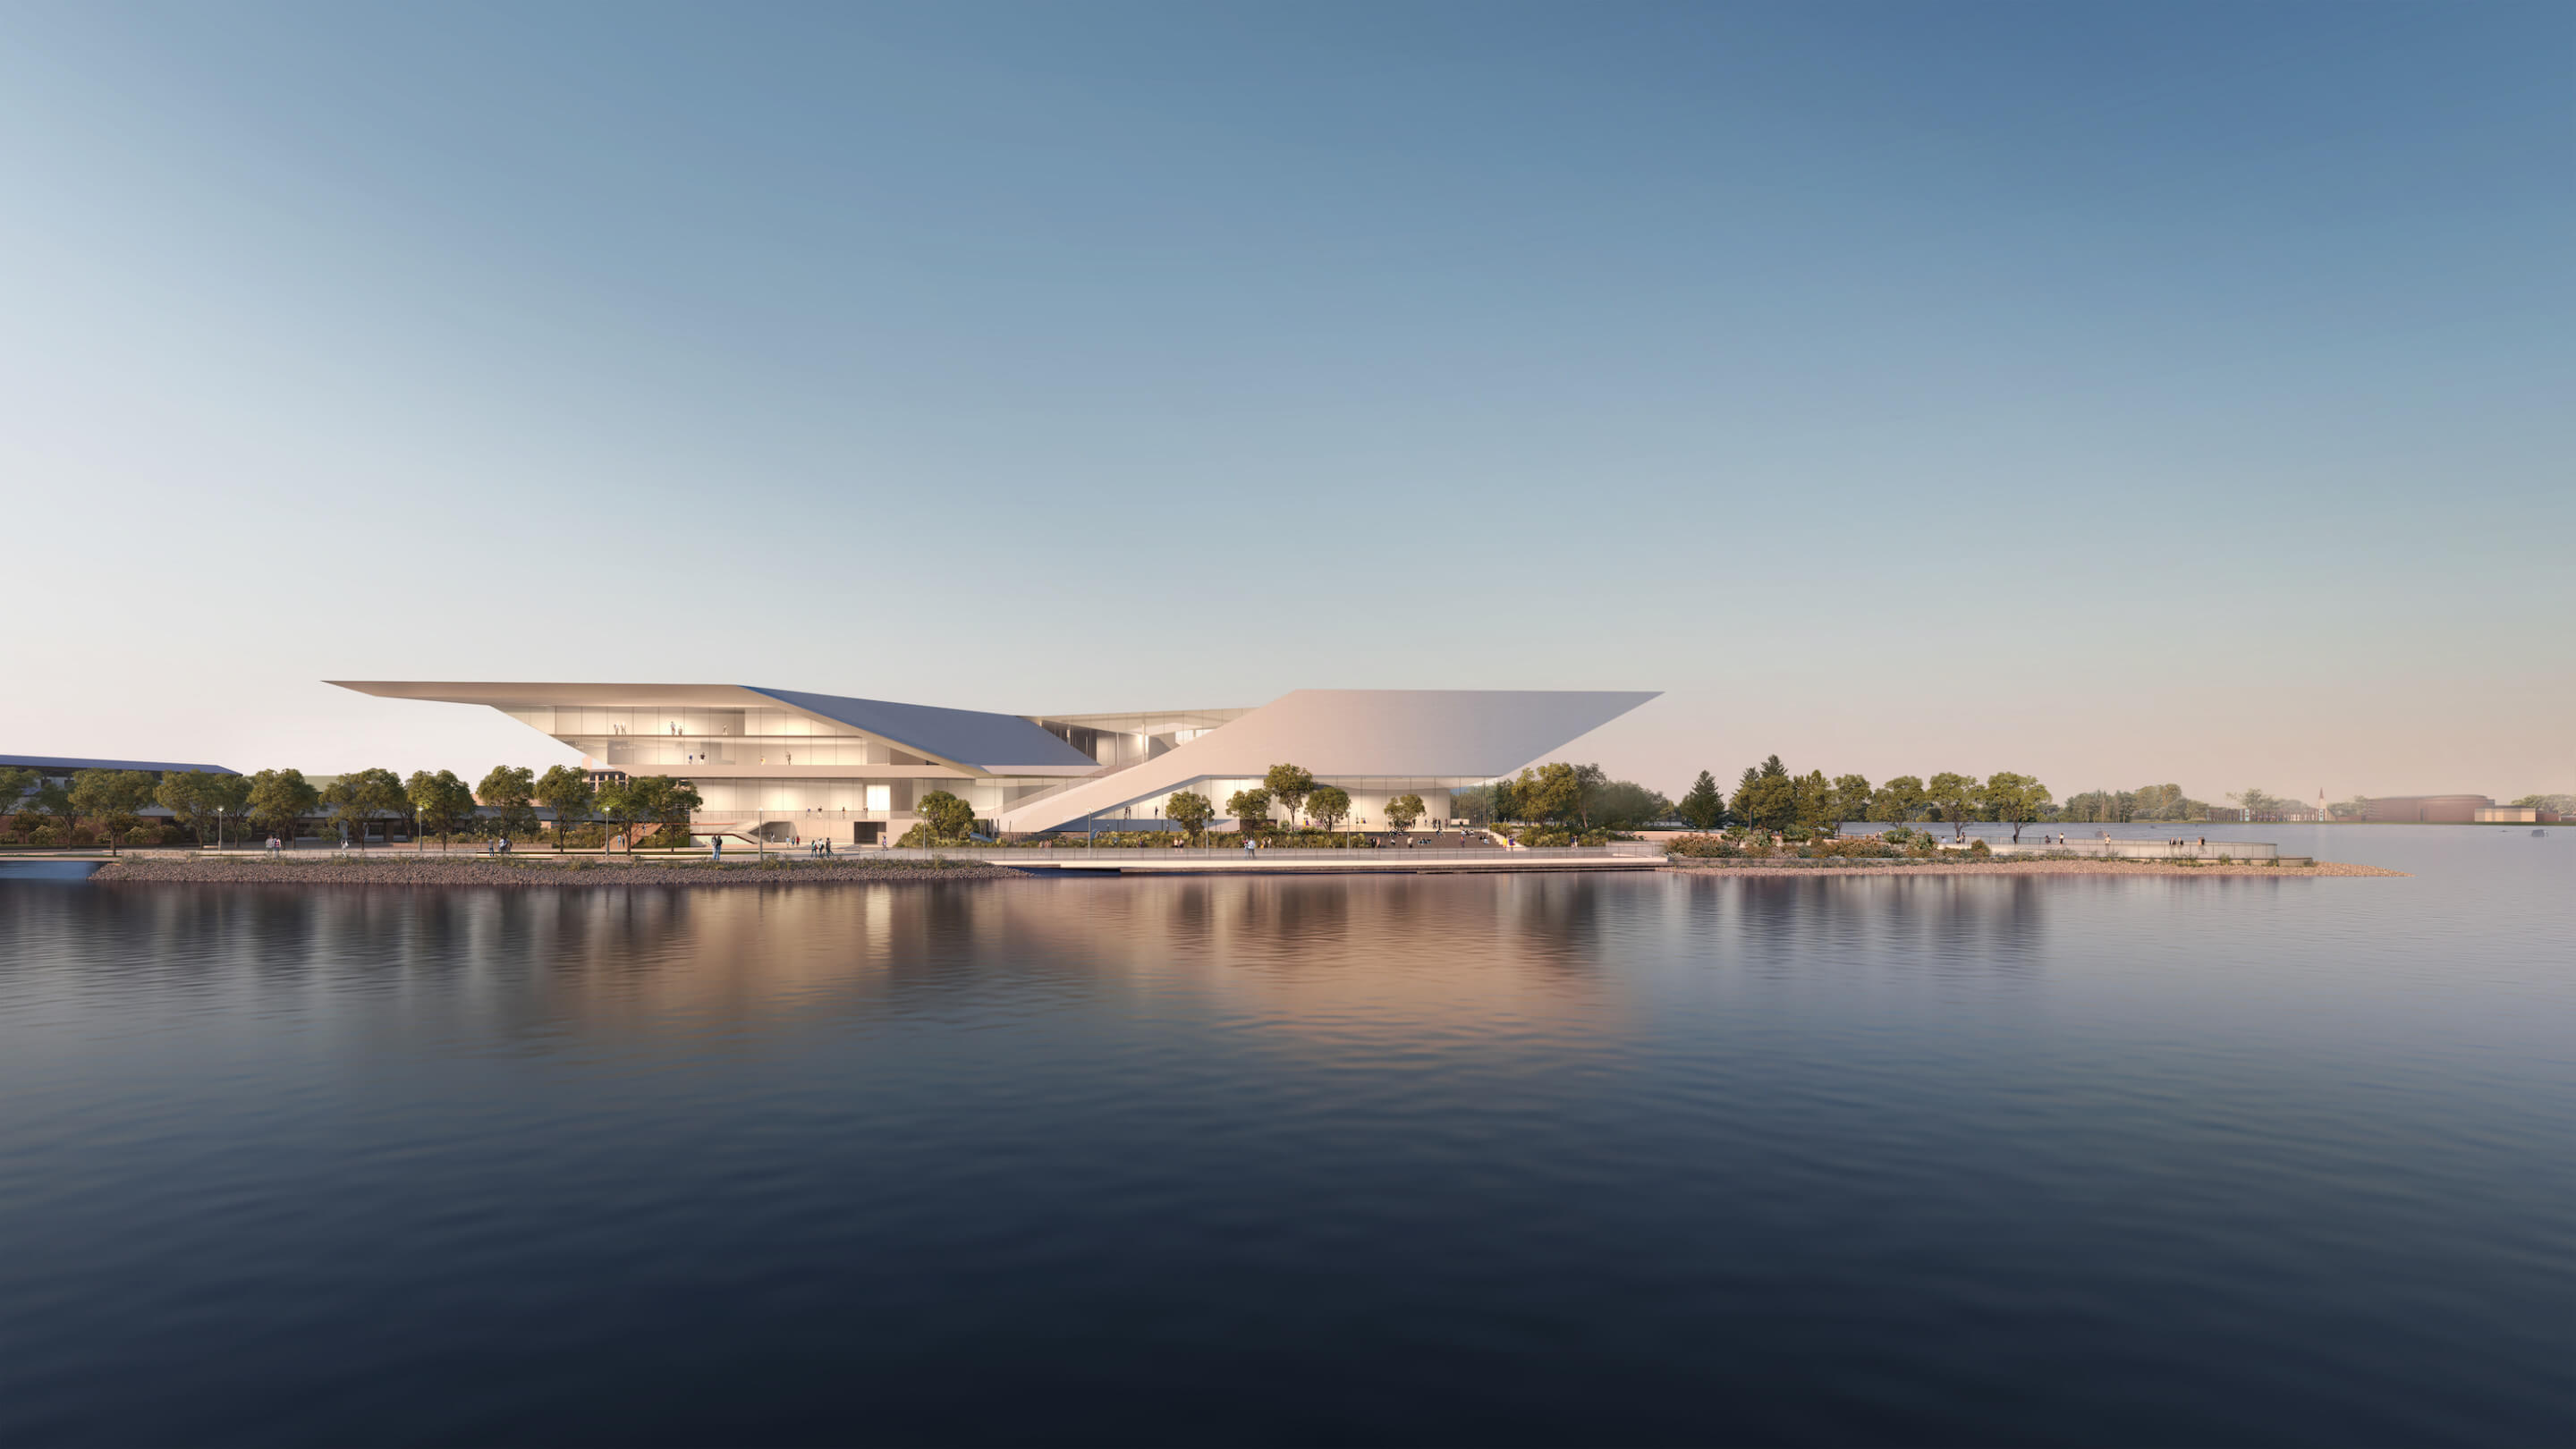 rendering of a musuem complex on the water